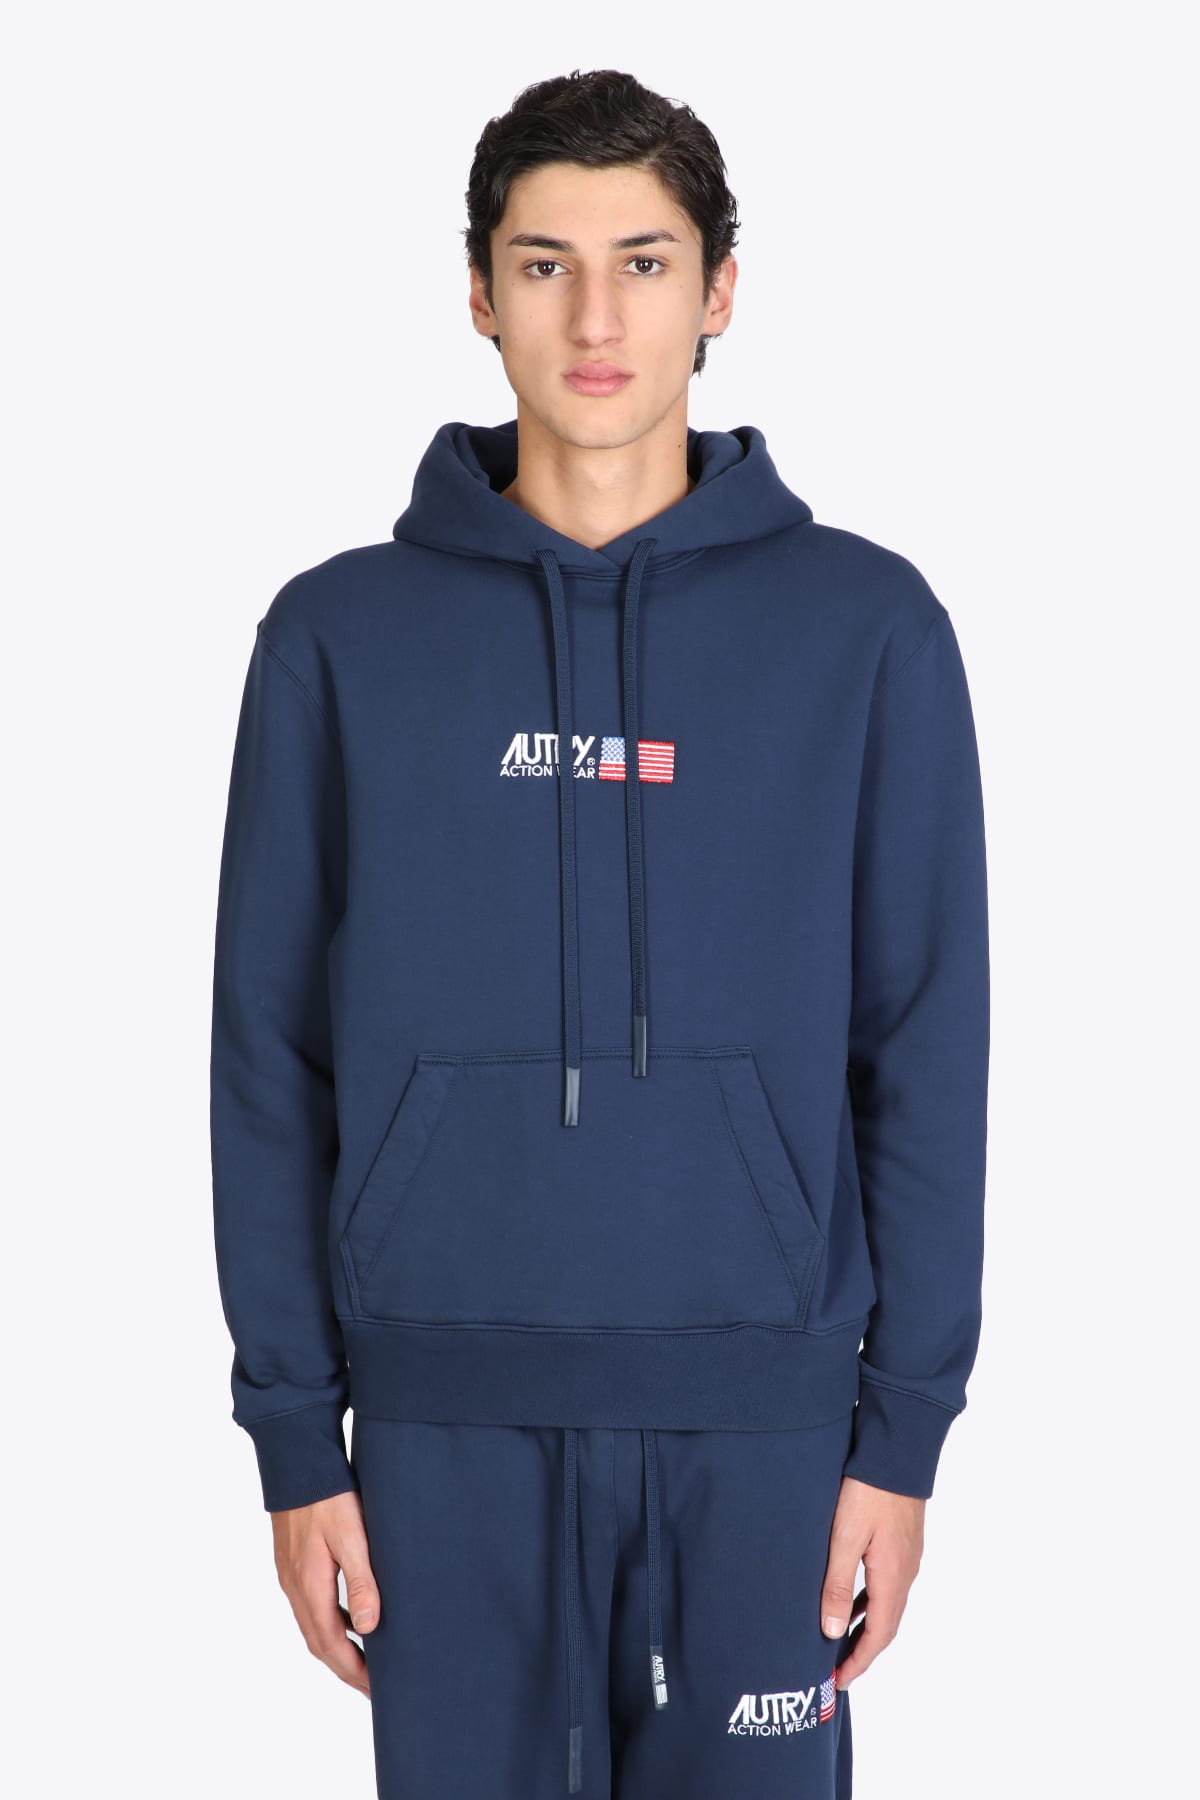 AUTRY HOODIE ICONIC MAN EMBRO BLUE BLUE COTTON HOODIE WITH LOGO EMBROIDERY.